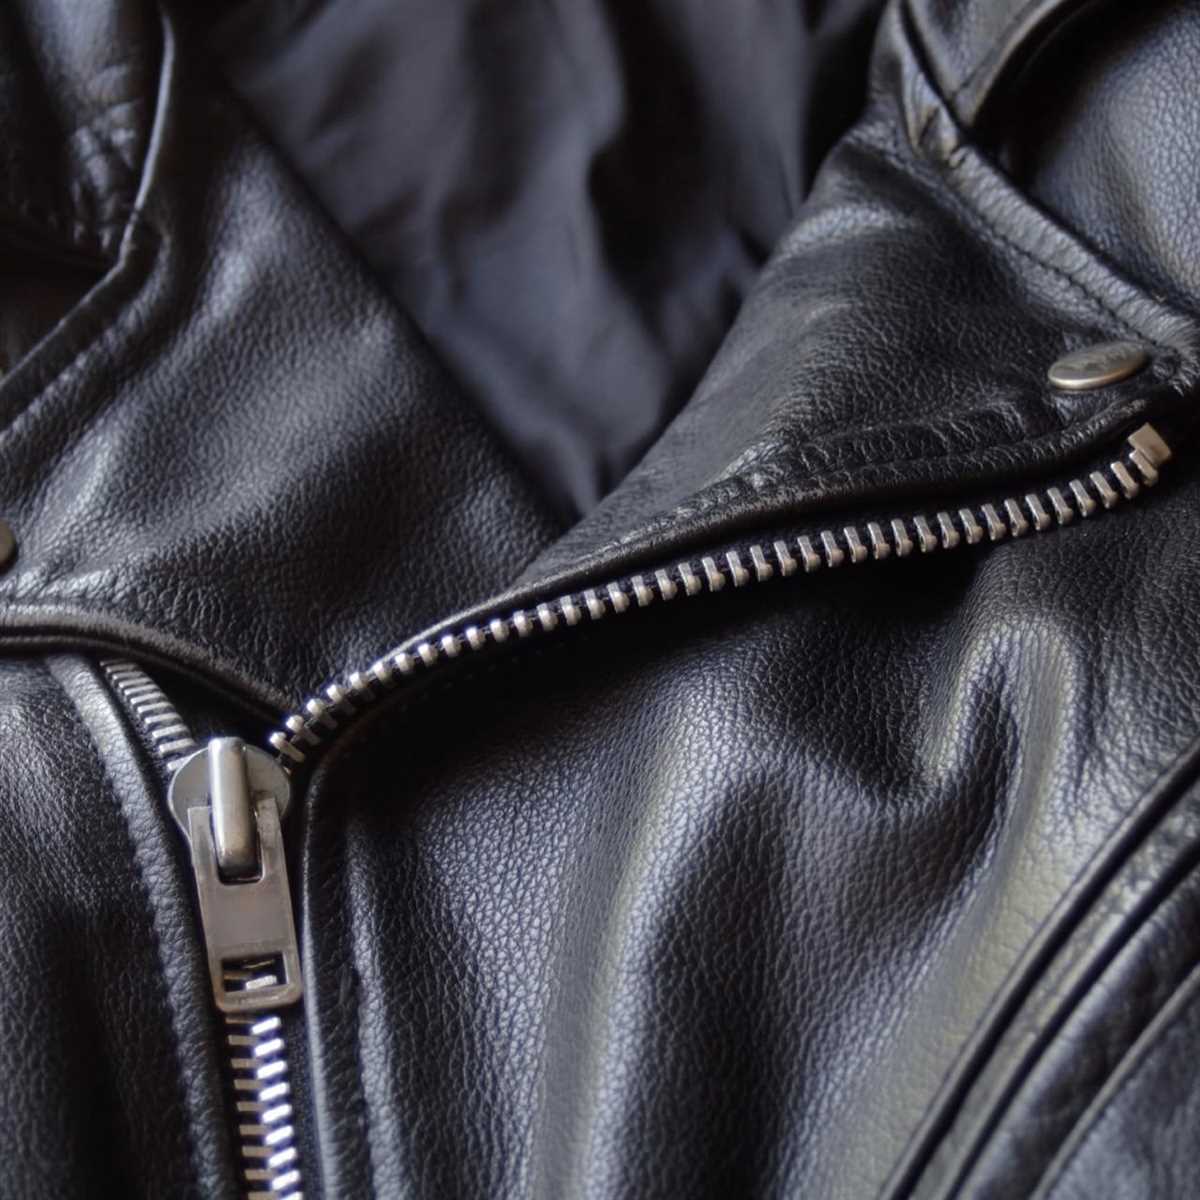 Is It Safe to Wash a Leather Jacket in the Washing Machine?